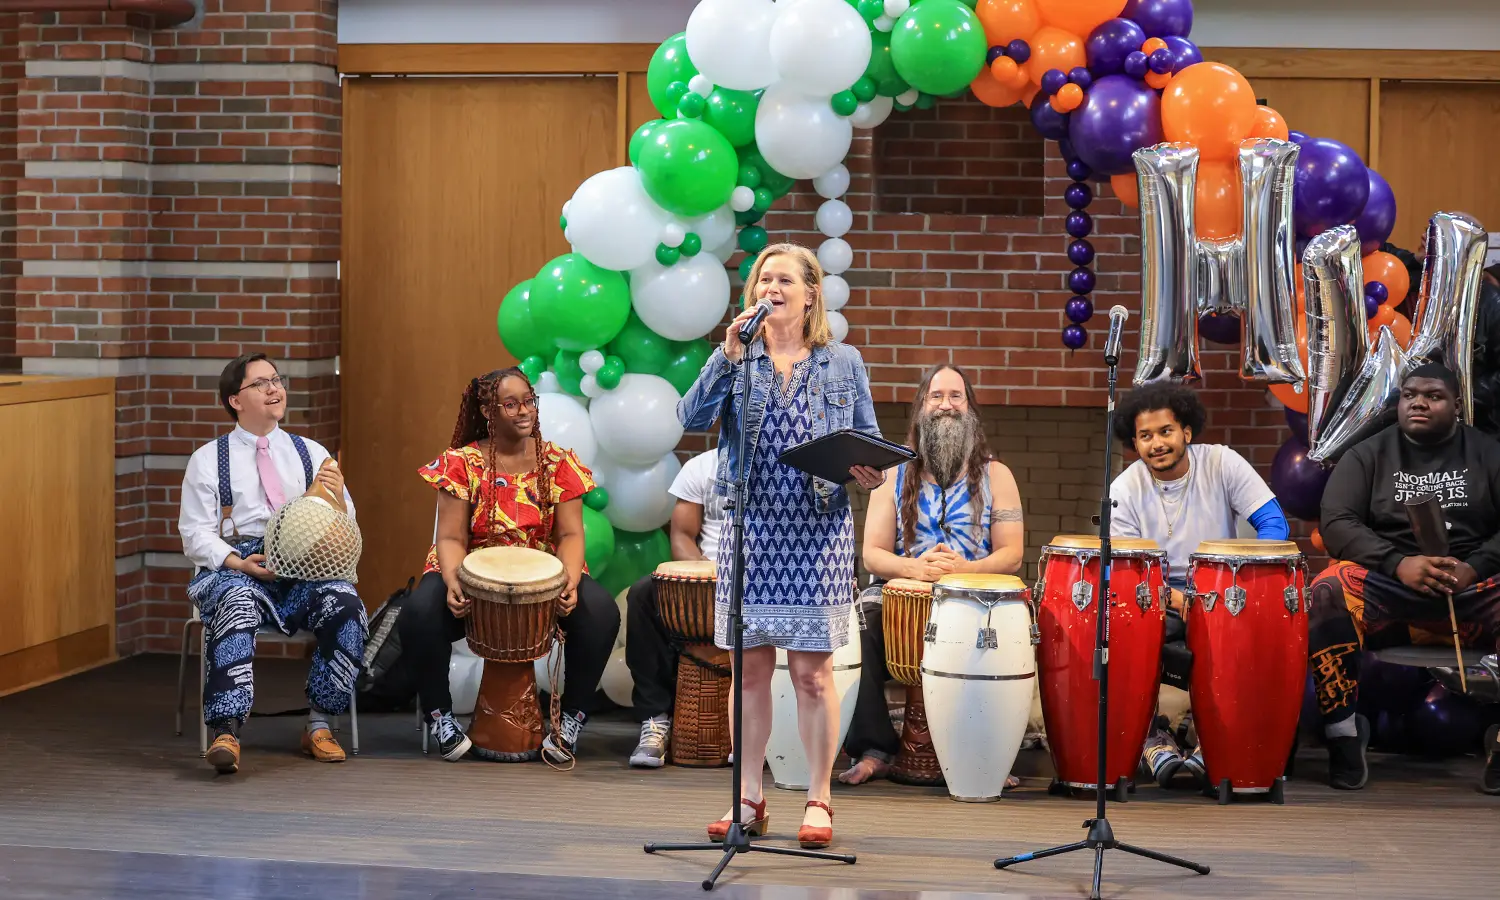 In This Week in Photos, we feature highlights from the inaugural HWS Day, a student showcase of academic scholarship. Here, Provost and Dean of Faculty Sarah Kirk kicks off HWS Day at the Community Dinner in the Great Hall of Saga.